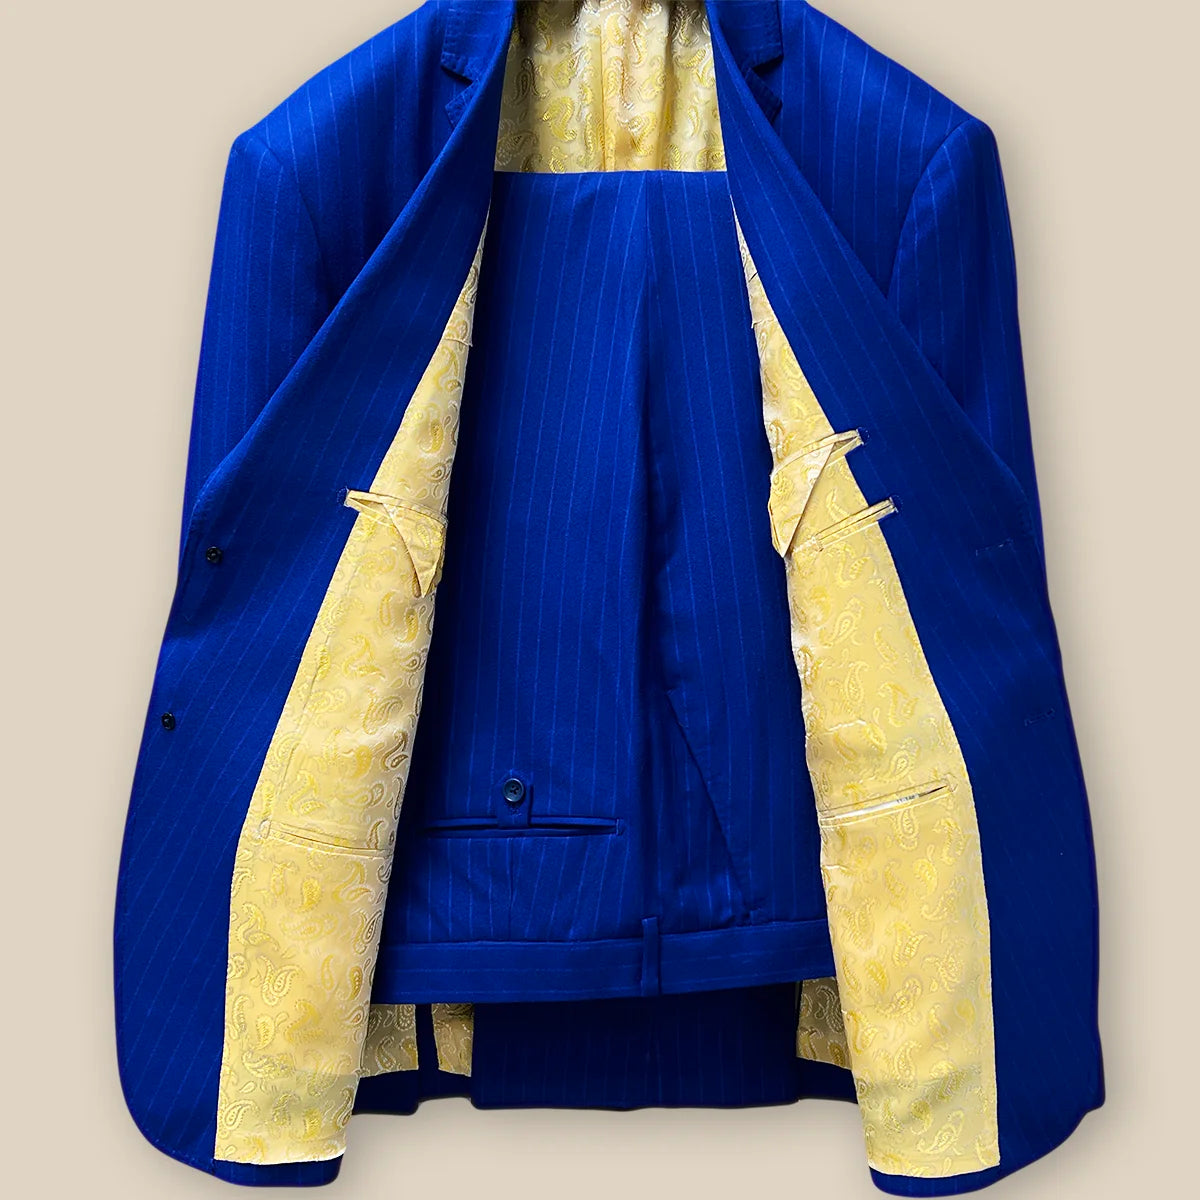 Full view of the royal blue pinstripe suit with jacket and pants.